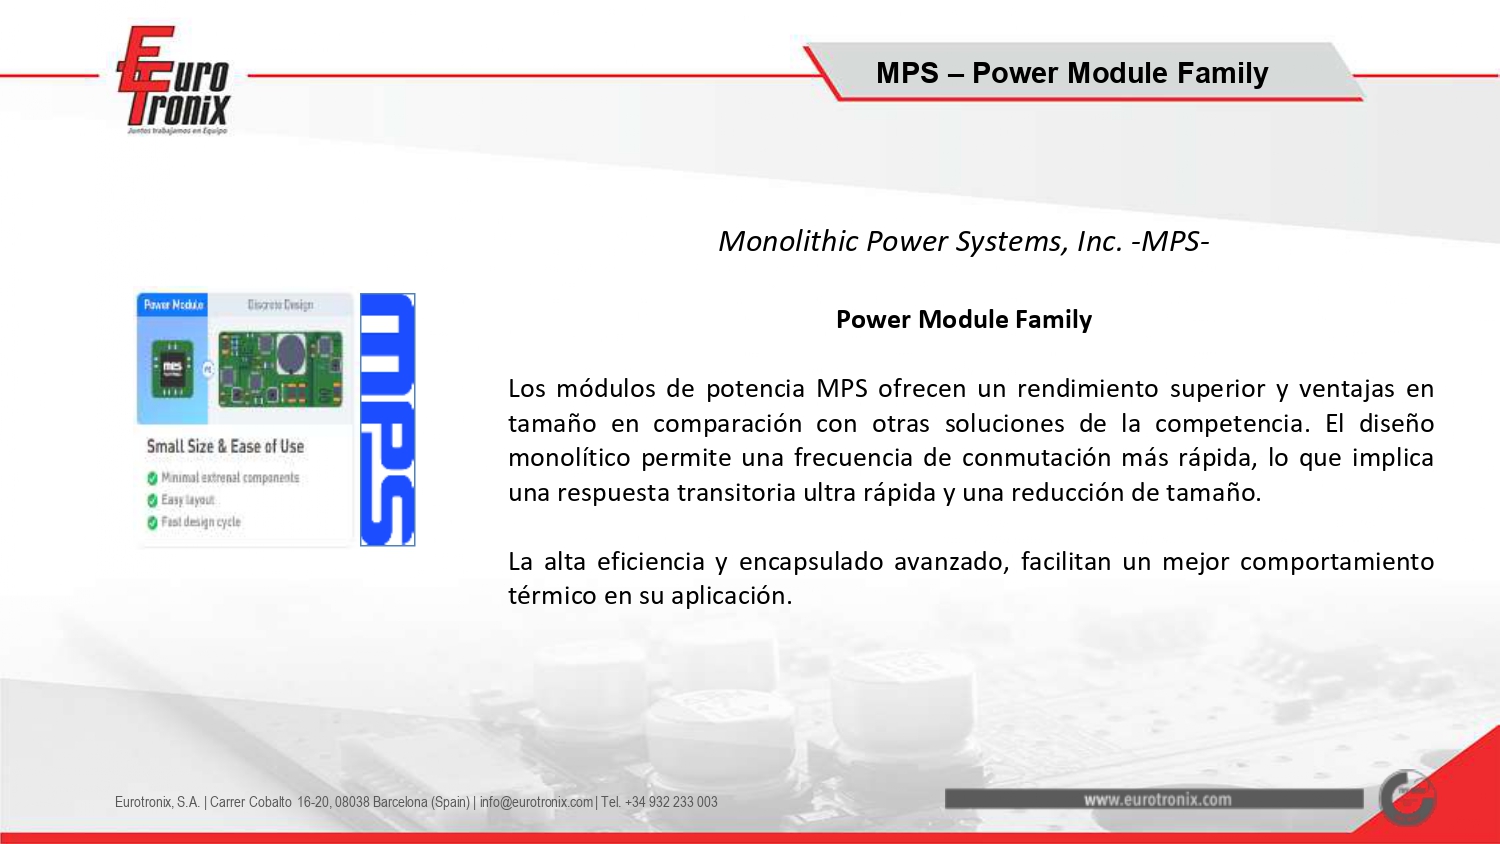 Monolithic Power Systems, Inc. -MPS- Power Module Family